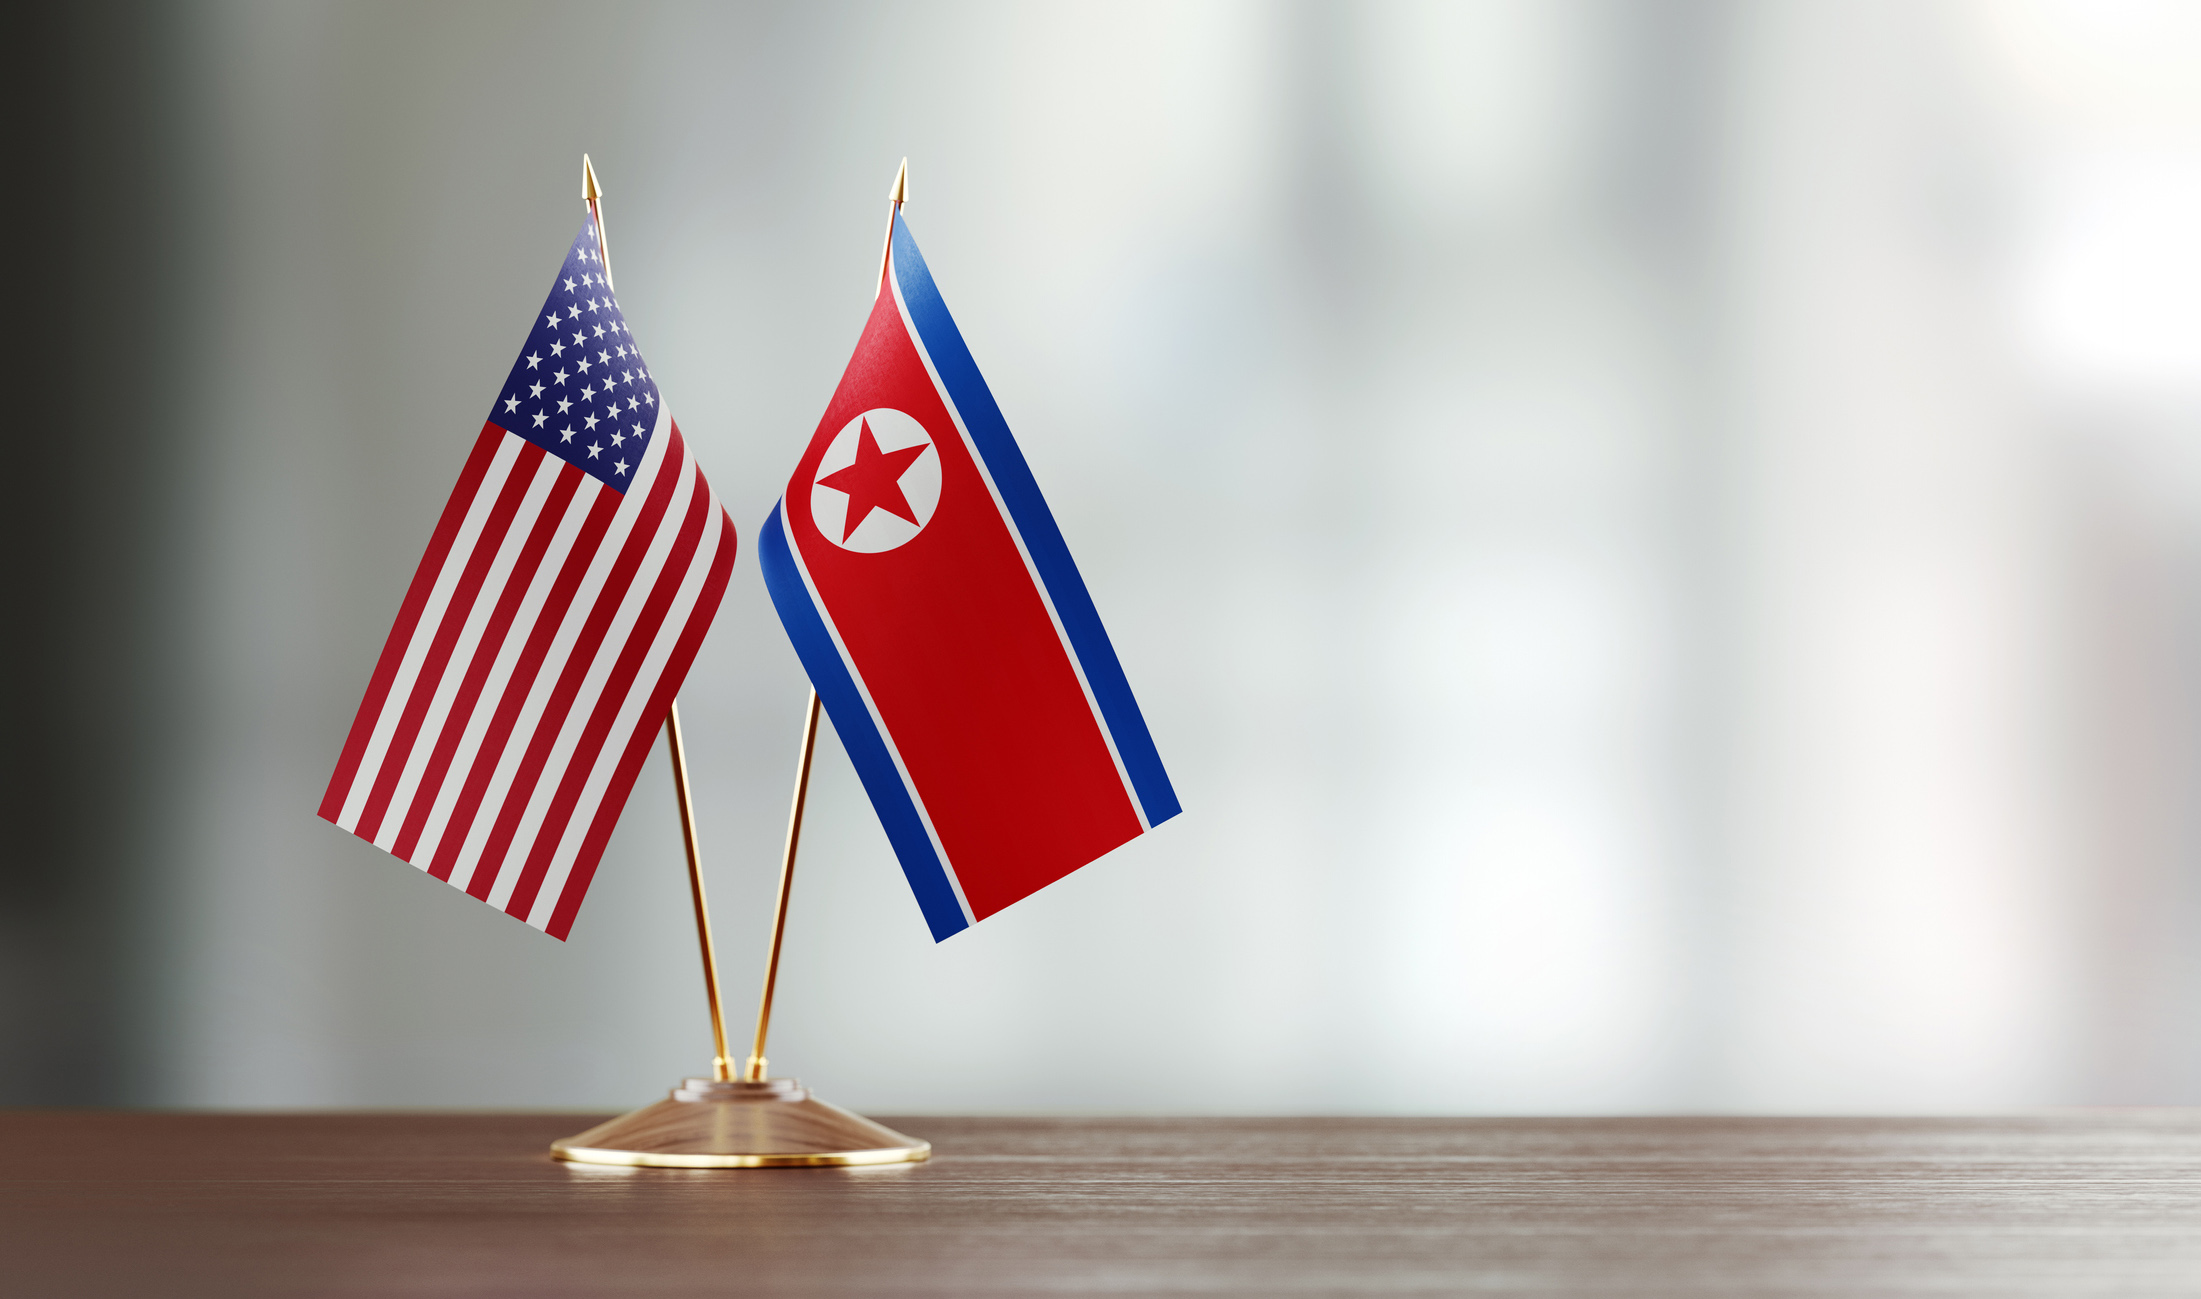 American and North Korean flag pair on desk over defocused background. Horizontal composition with copy space and selective focus.